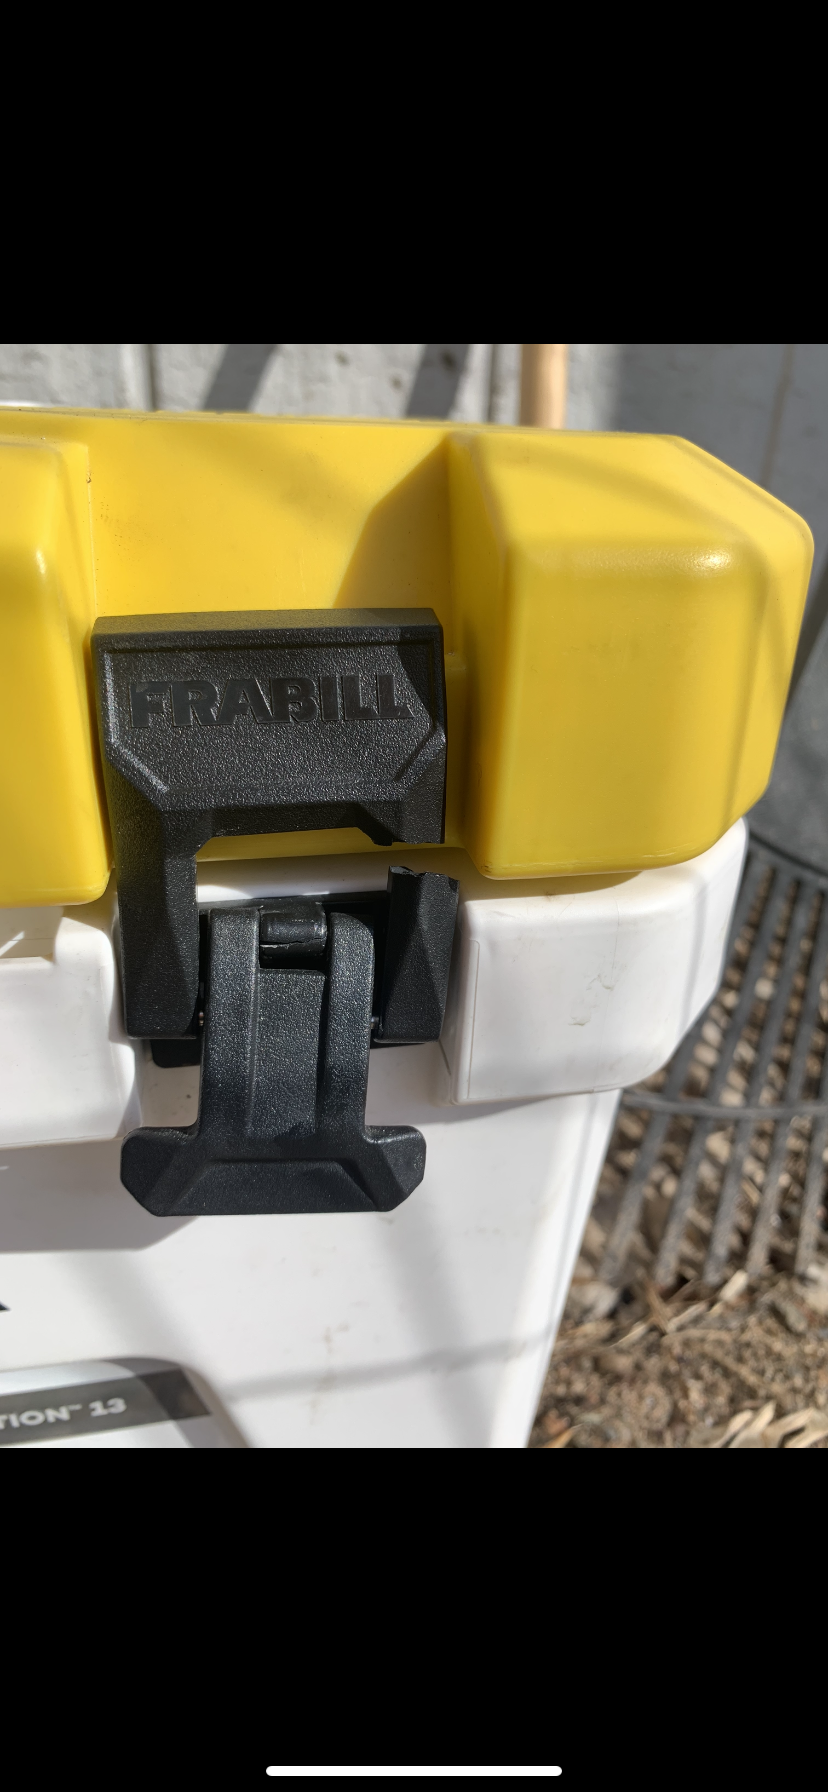 Frabill Bait Station Latches - General Discussion Forum - General  Discussion Forum